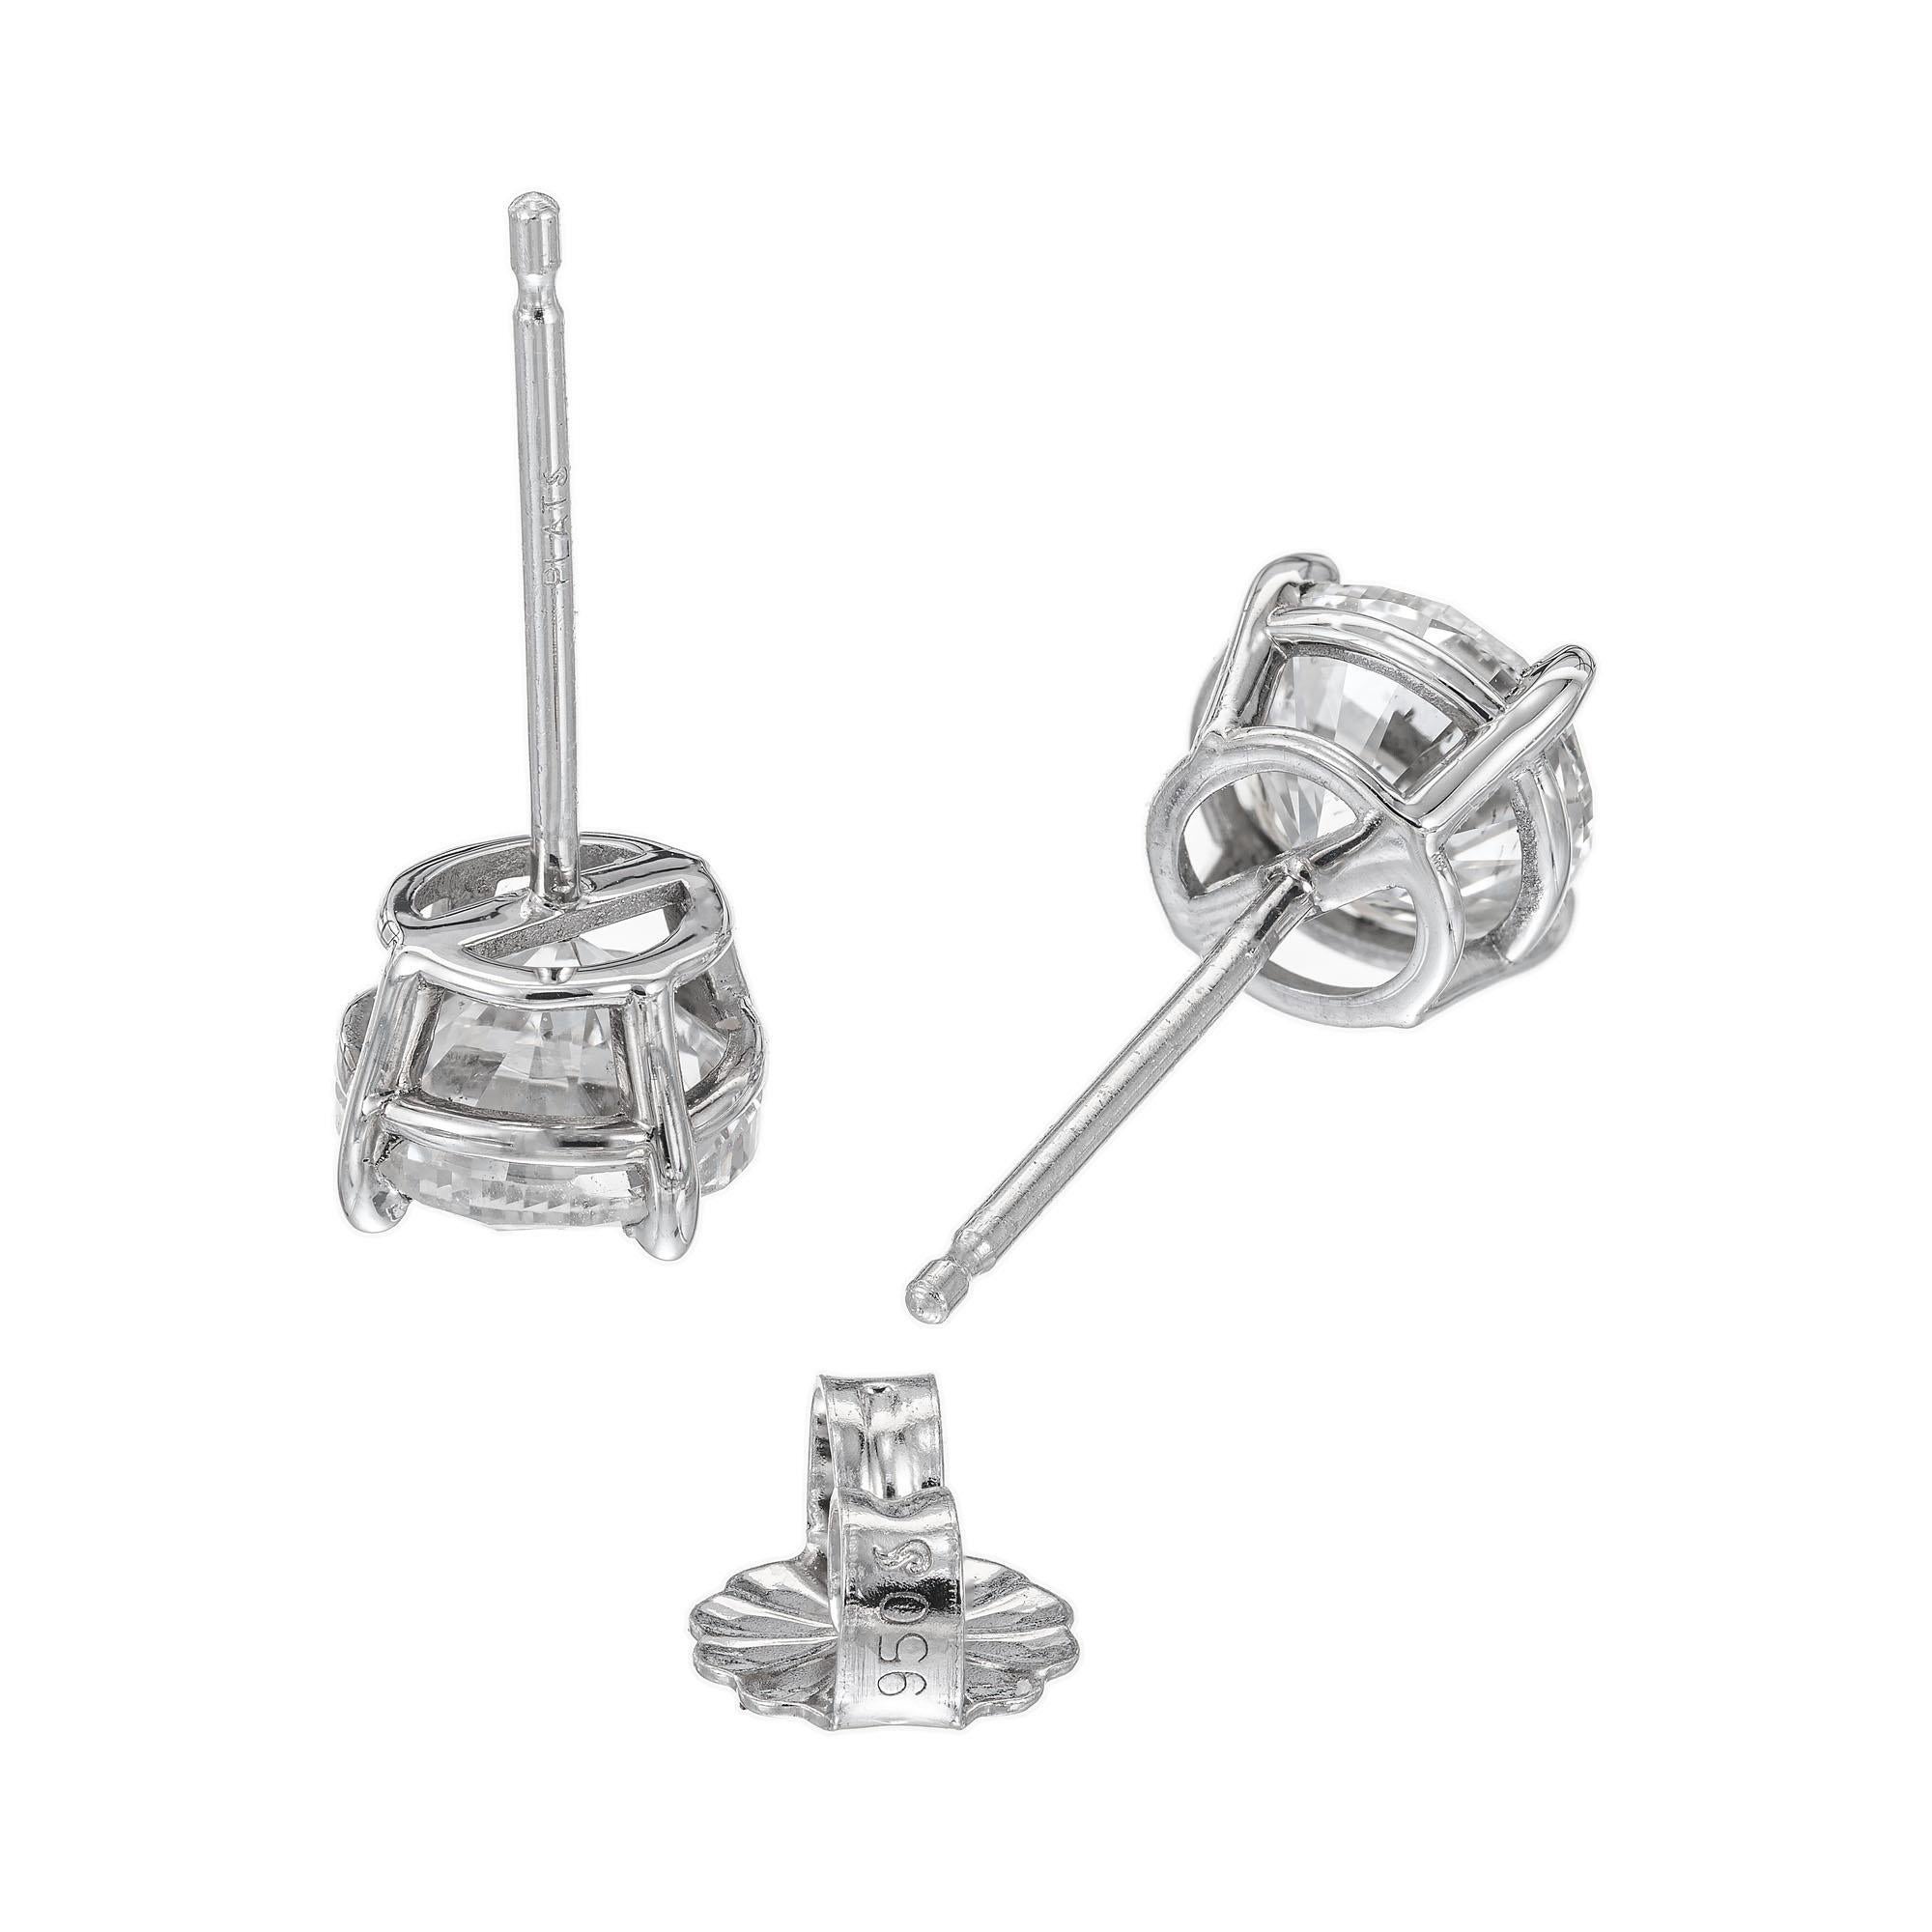 Peter Suchy GIA Certified 2.01 Carat Diamond Platinum Stud Earrings For Sale 2